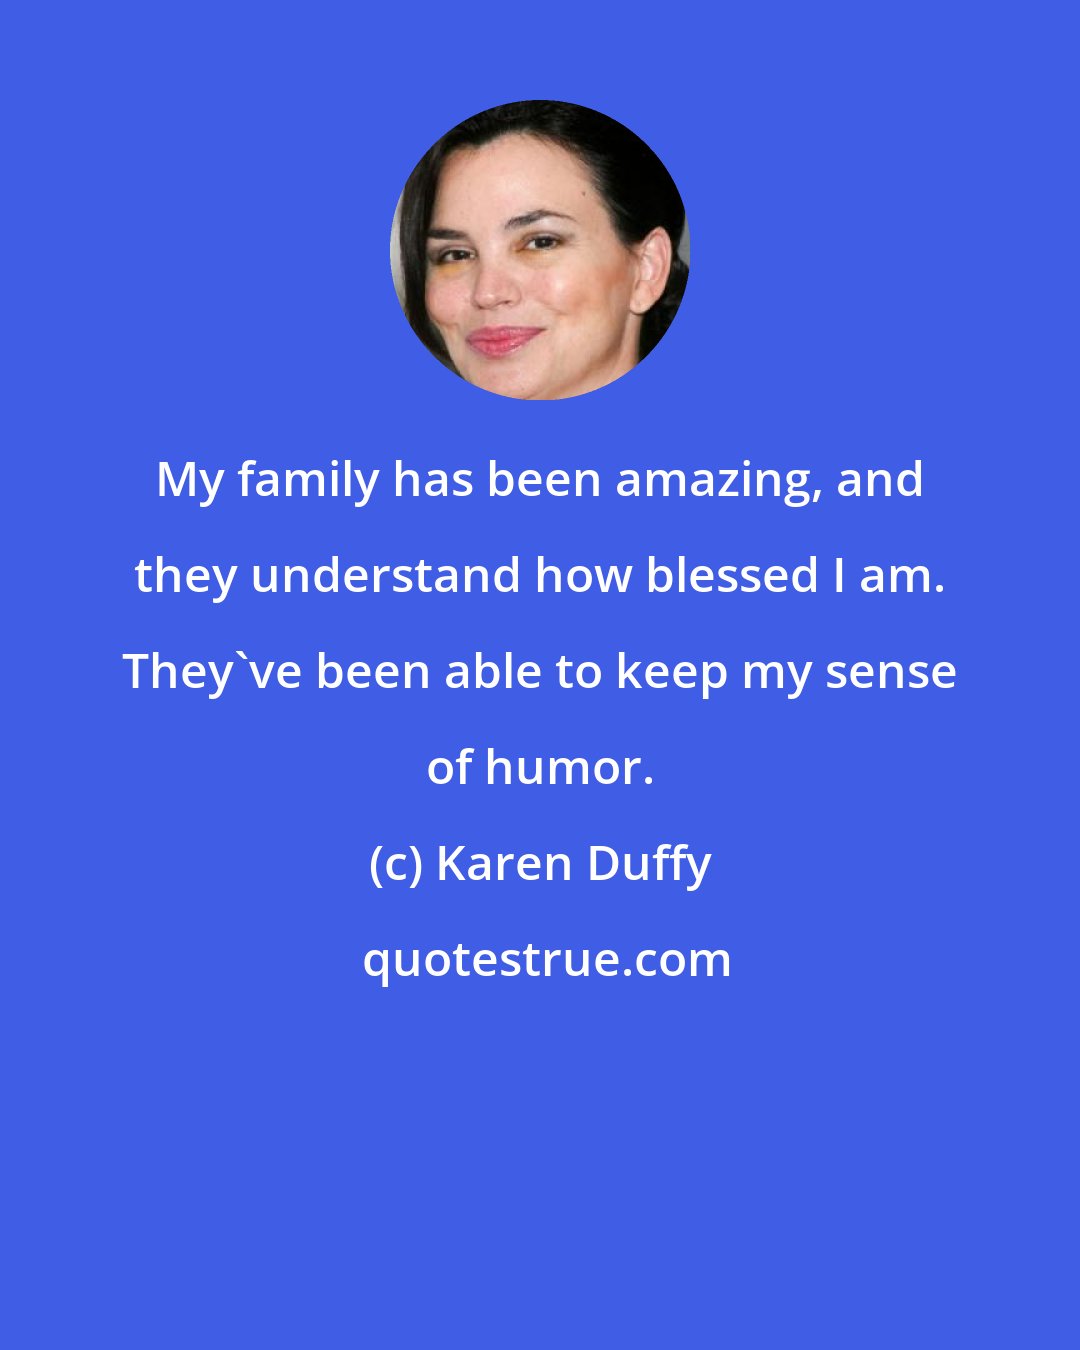 Karen Duffy: My family has been amazing, and they understand how blessed I am. They've been able to keep my sense of humor.